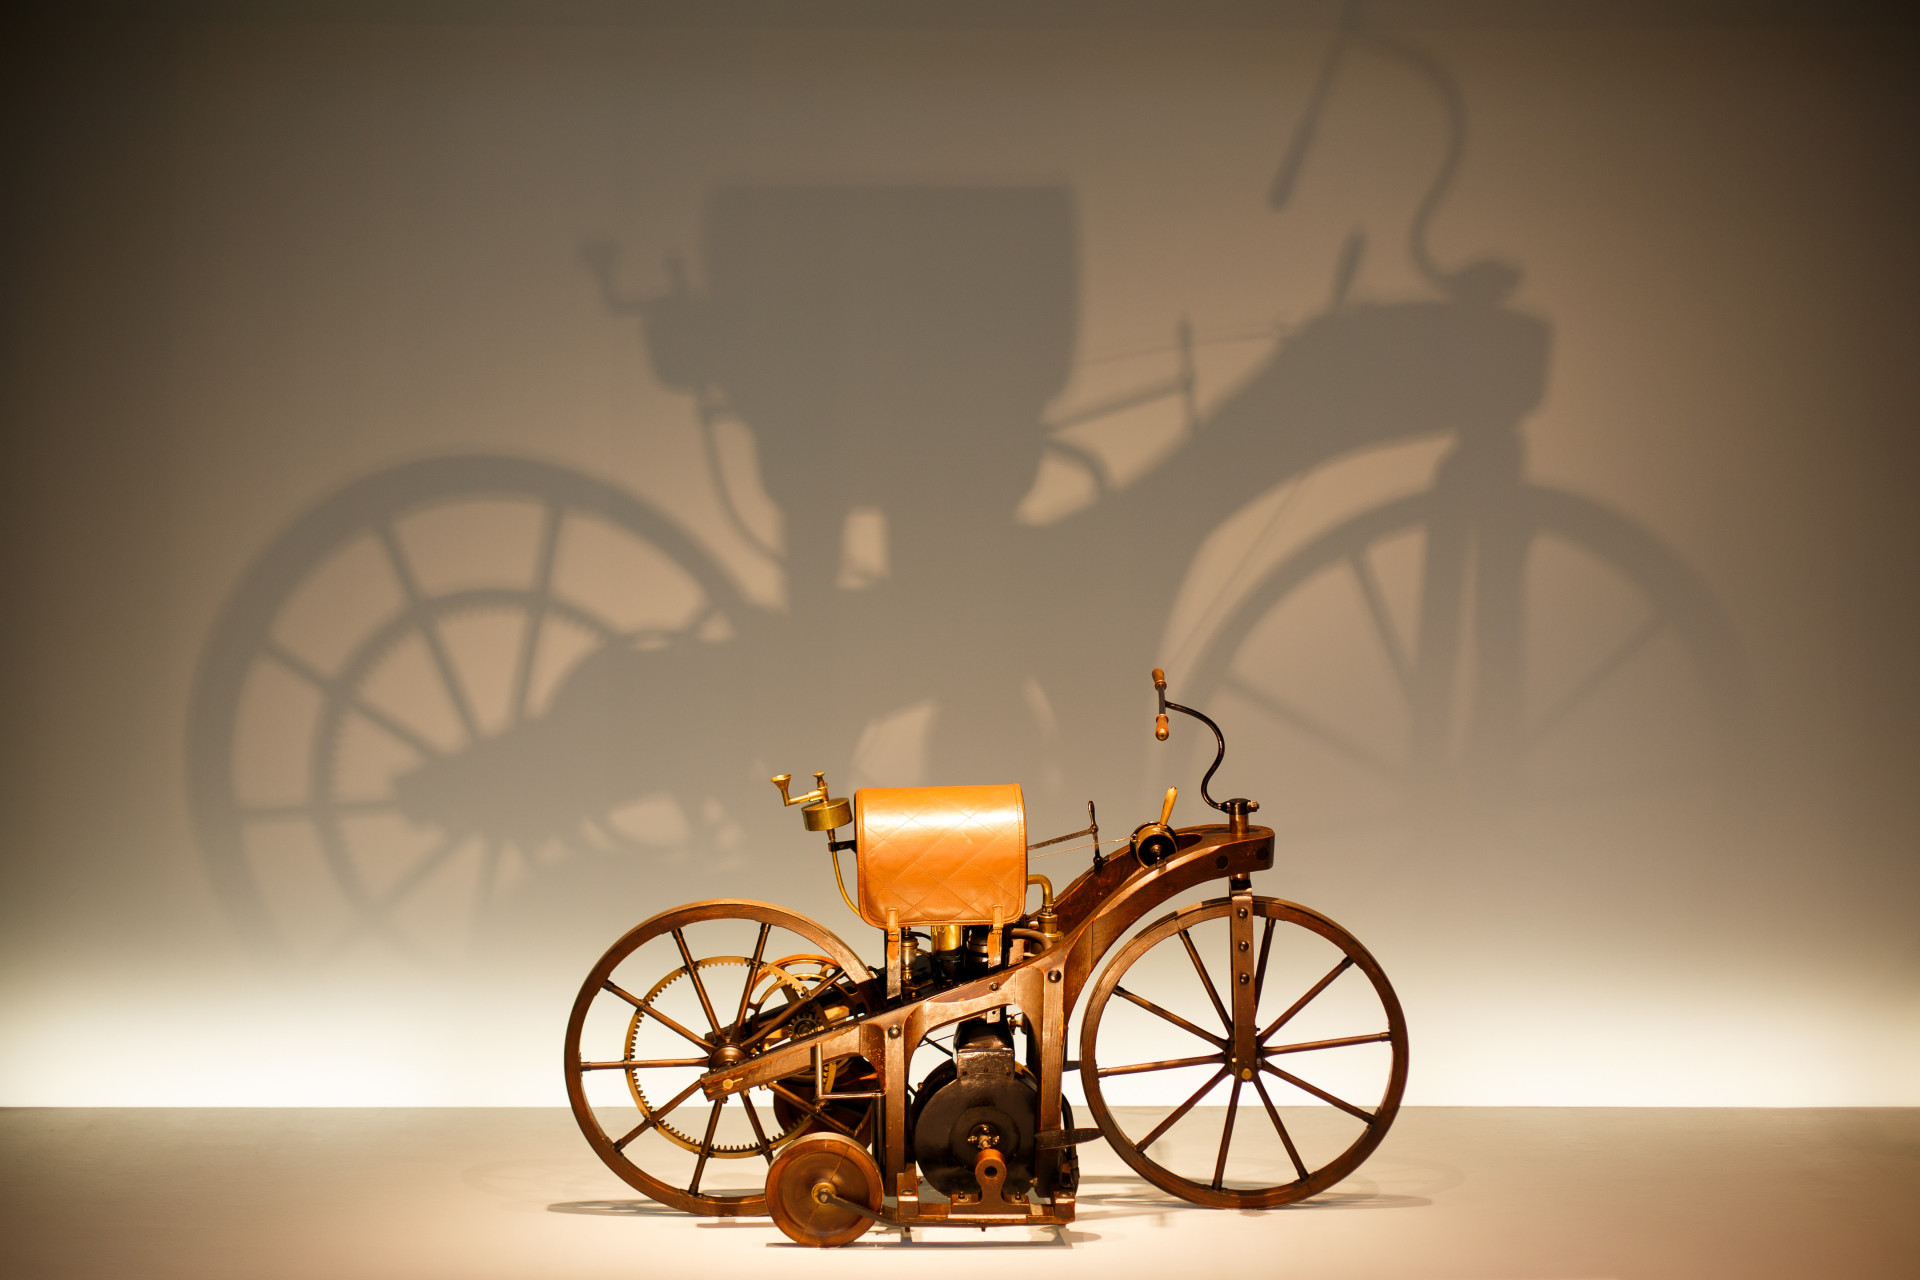 In 1885, Gottlieb Daimler patented one of the first internal-combustion engines. Both he and Wilhelm Maybach are the grandfathers of the modern motorcycle.<p>You may also like:<a href="https://www.starsinsider.com/n/302589?utm_source=msn.com&utm_medium=display&utm_campaign=referral_description&utm_content=354515v5en-en"> Remembering Christopher Plummer, Hollywood's distinguished gentleman</a></p>